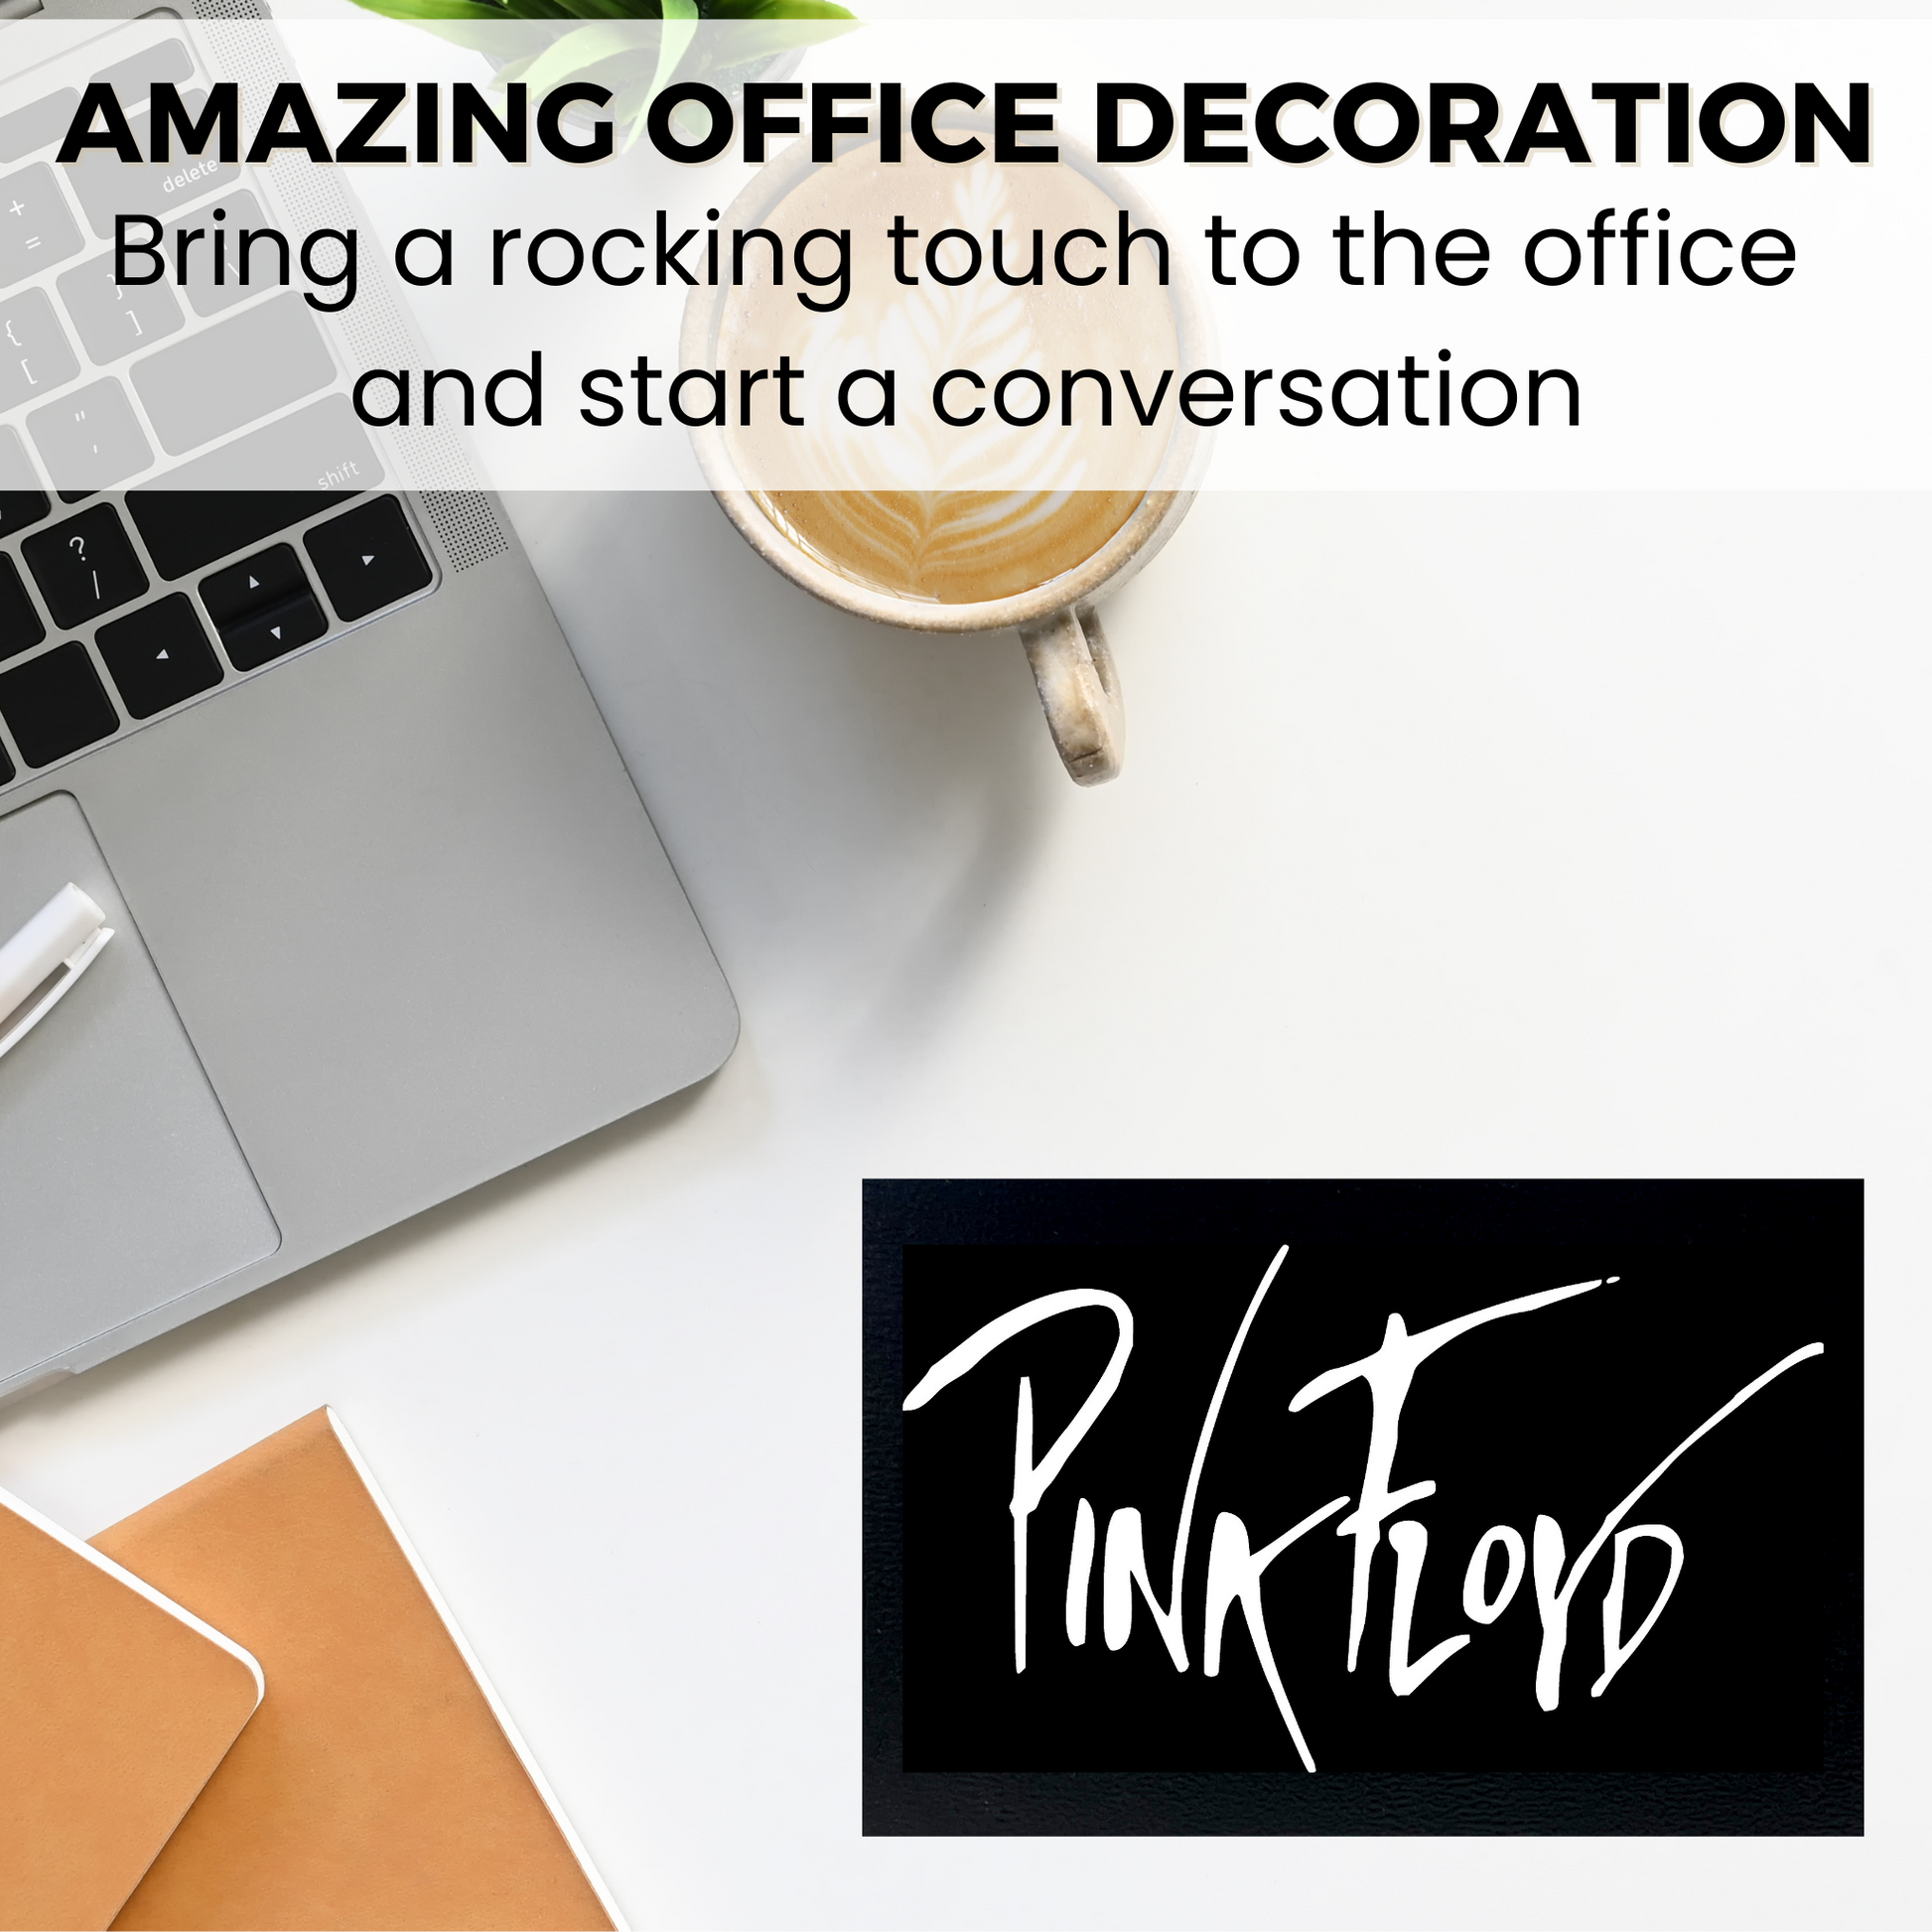 Pink Floyd The Wall Art Script Sign for the office